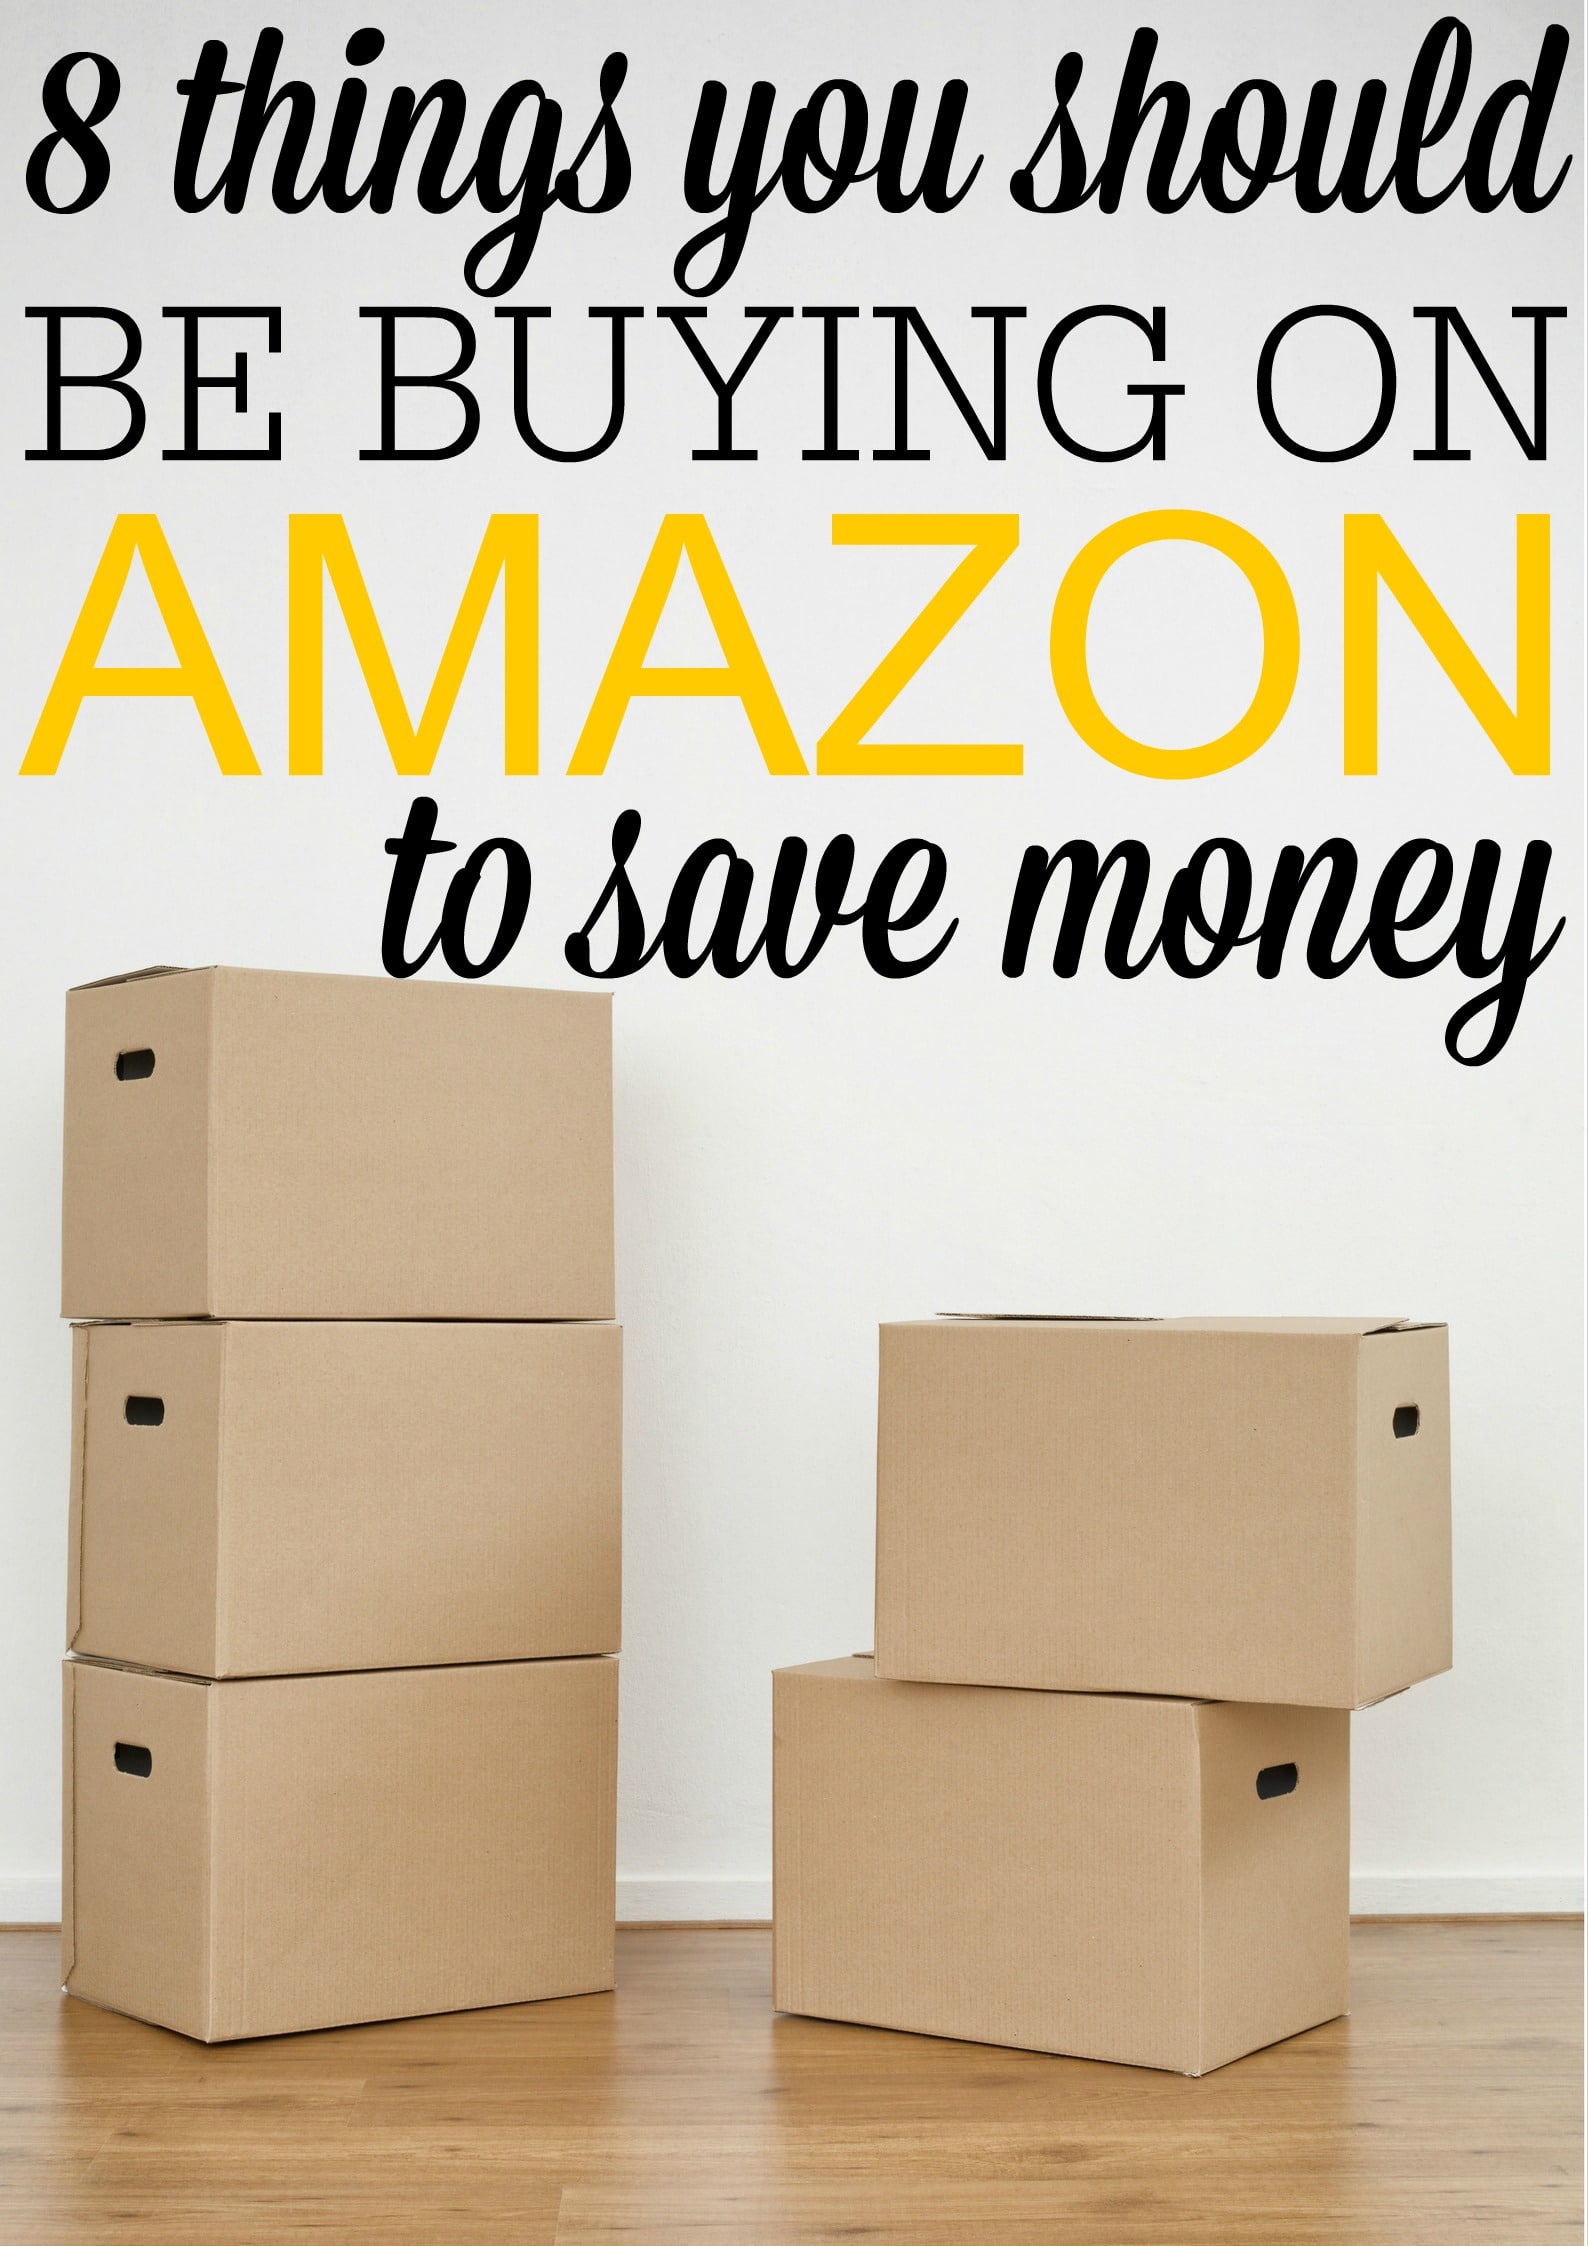 8 things you should be buying on Amazon to Save